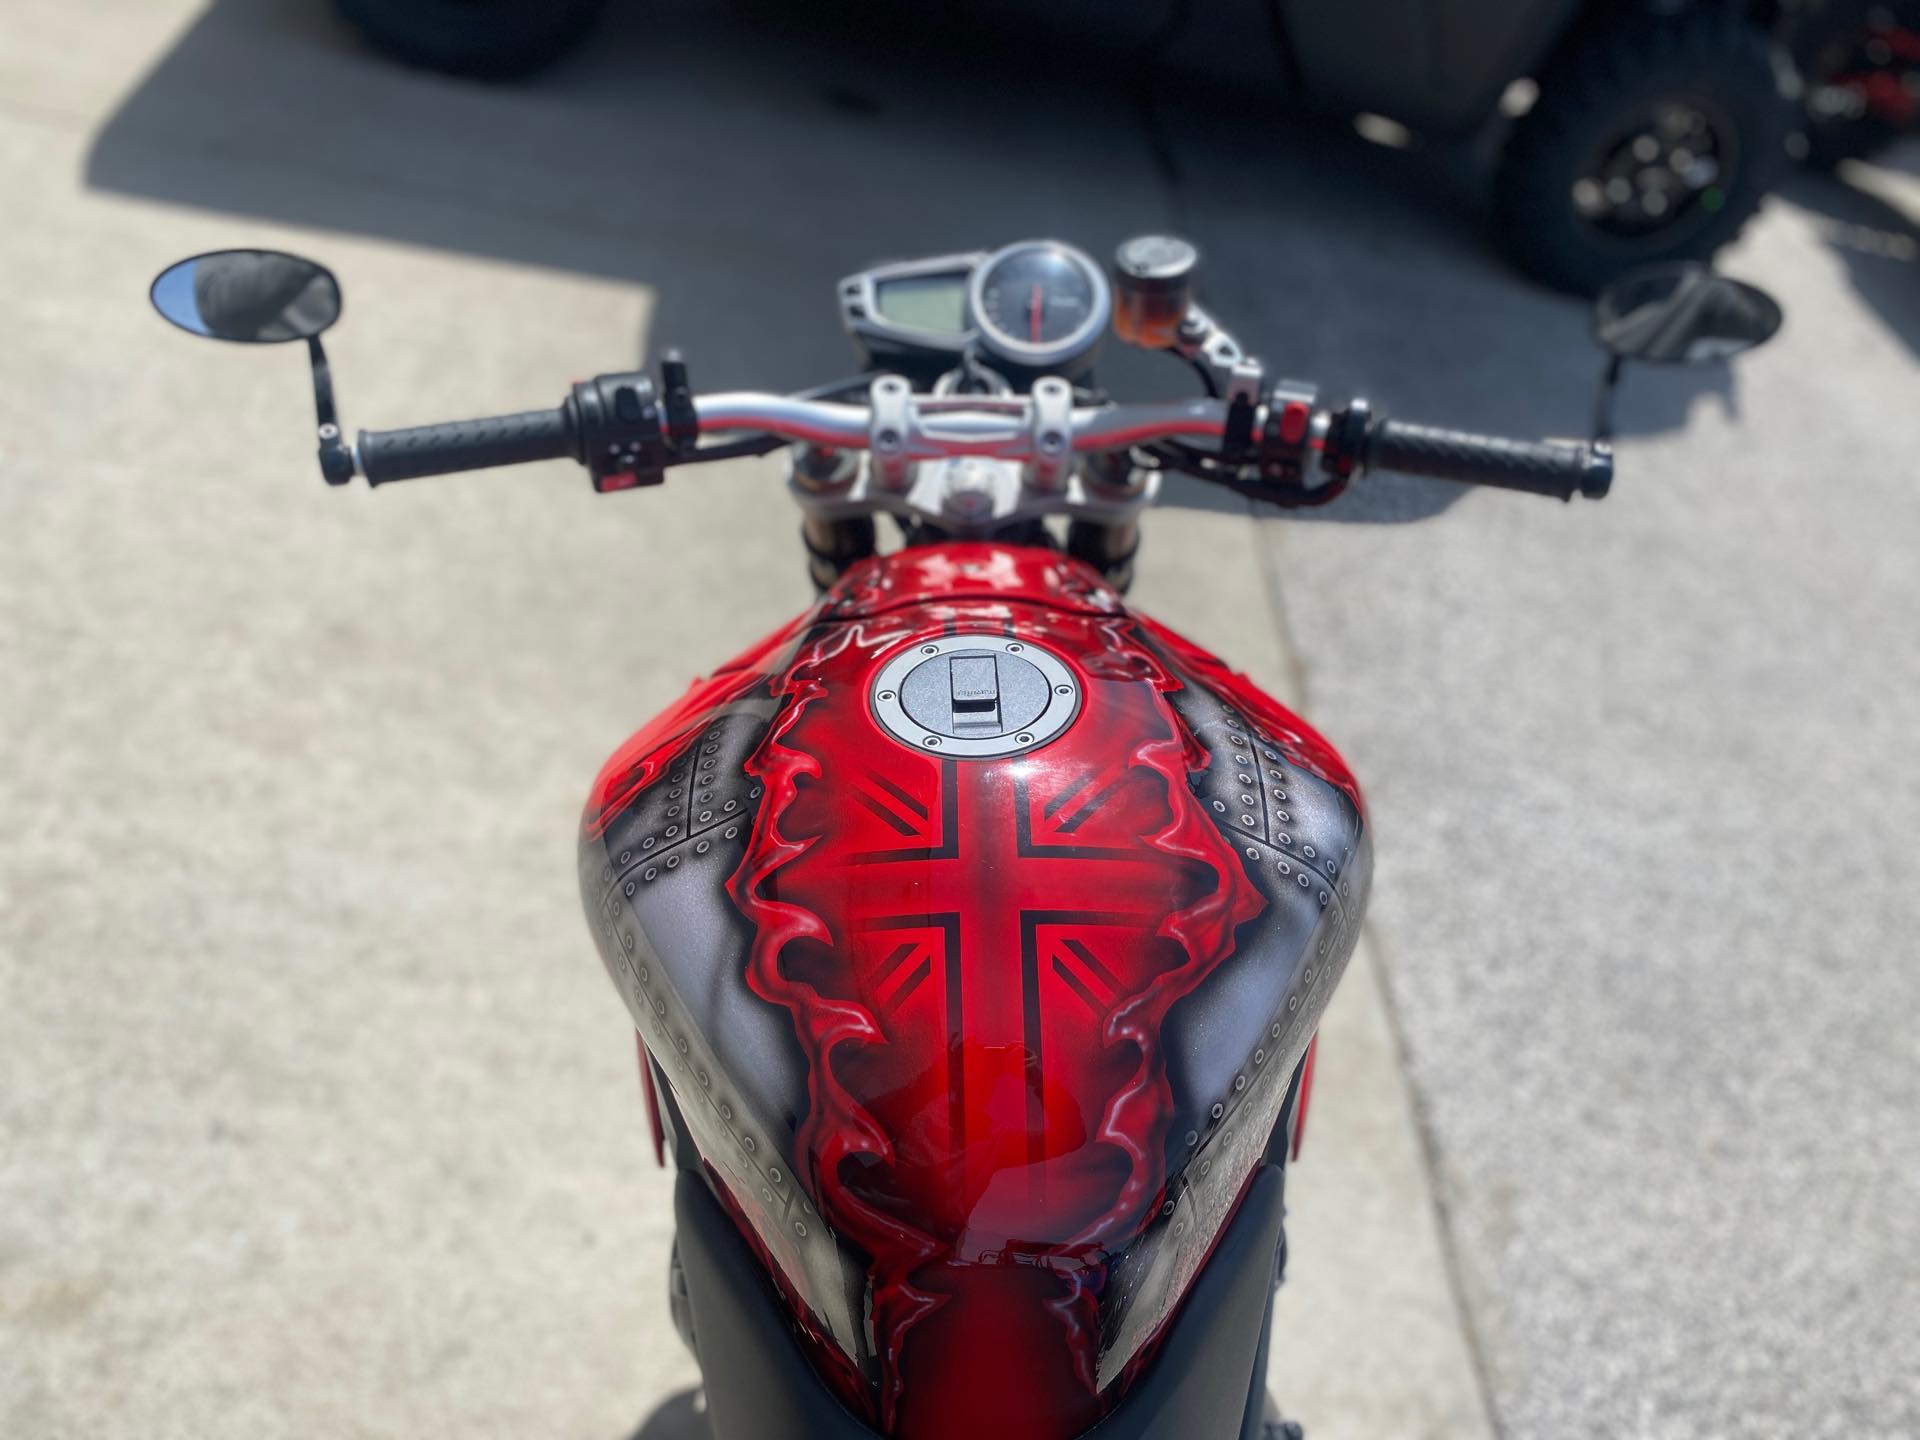 2015 Triumph Speed Triple ABS at Head Indian Motorcycle